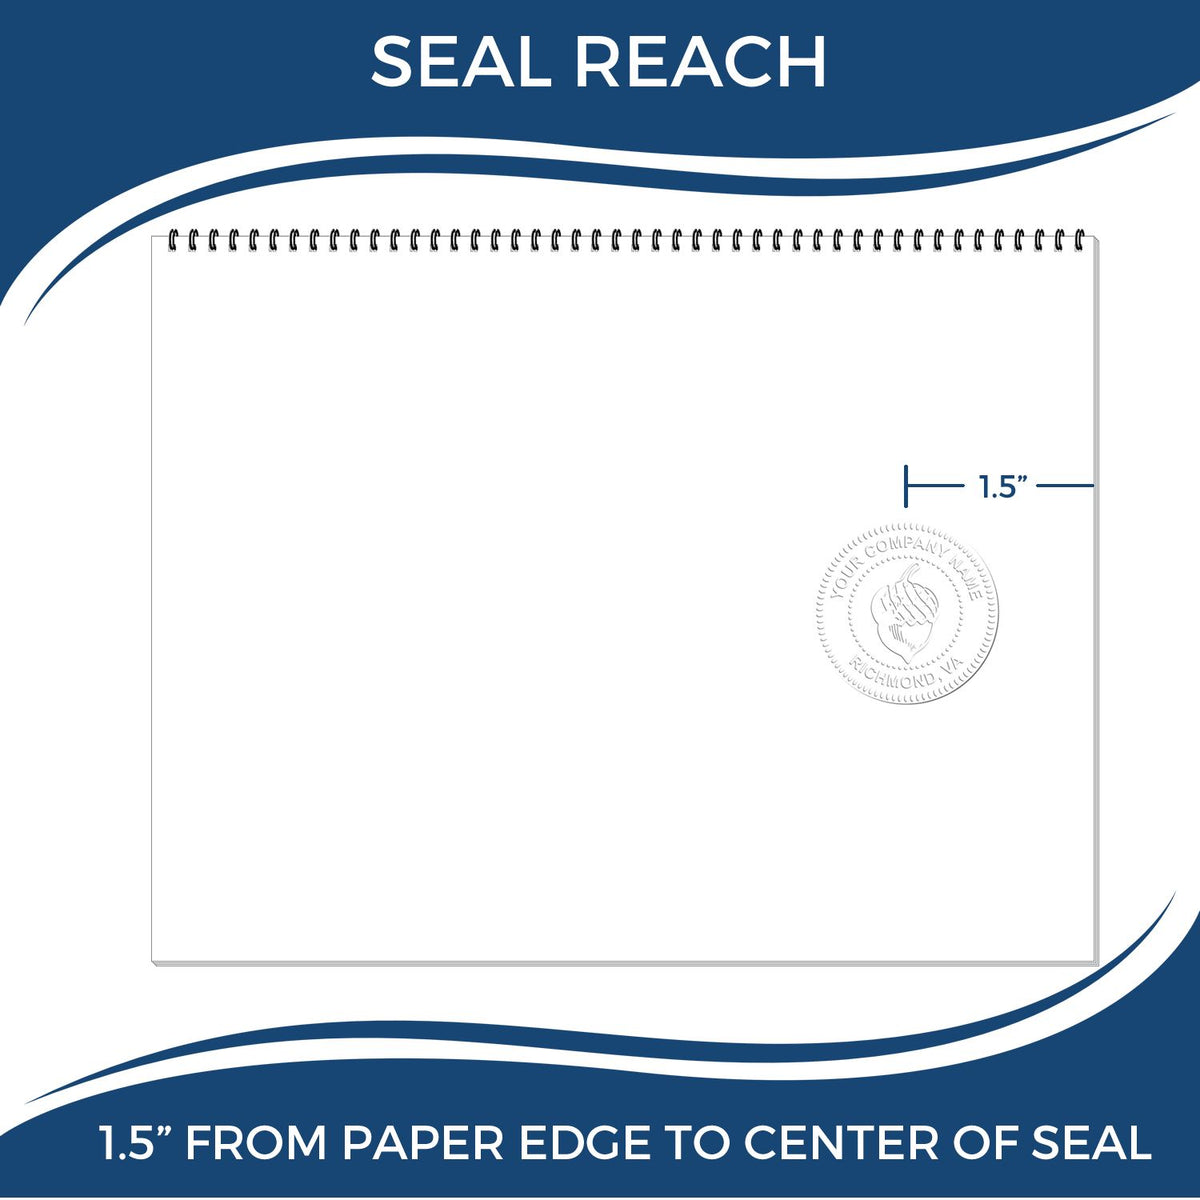 An infographic showing the seal reach which is represented by a ruler and a miniature seal image of the Soft Pocket Nebraska Landscape Architect Embosser